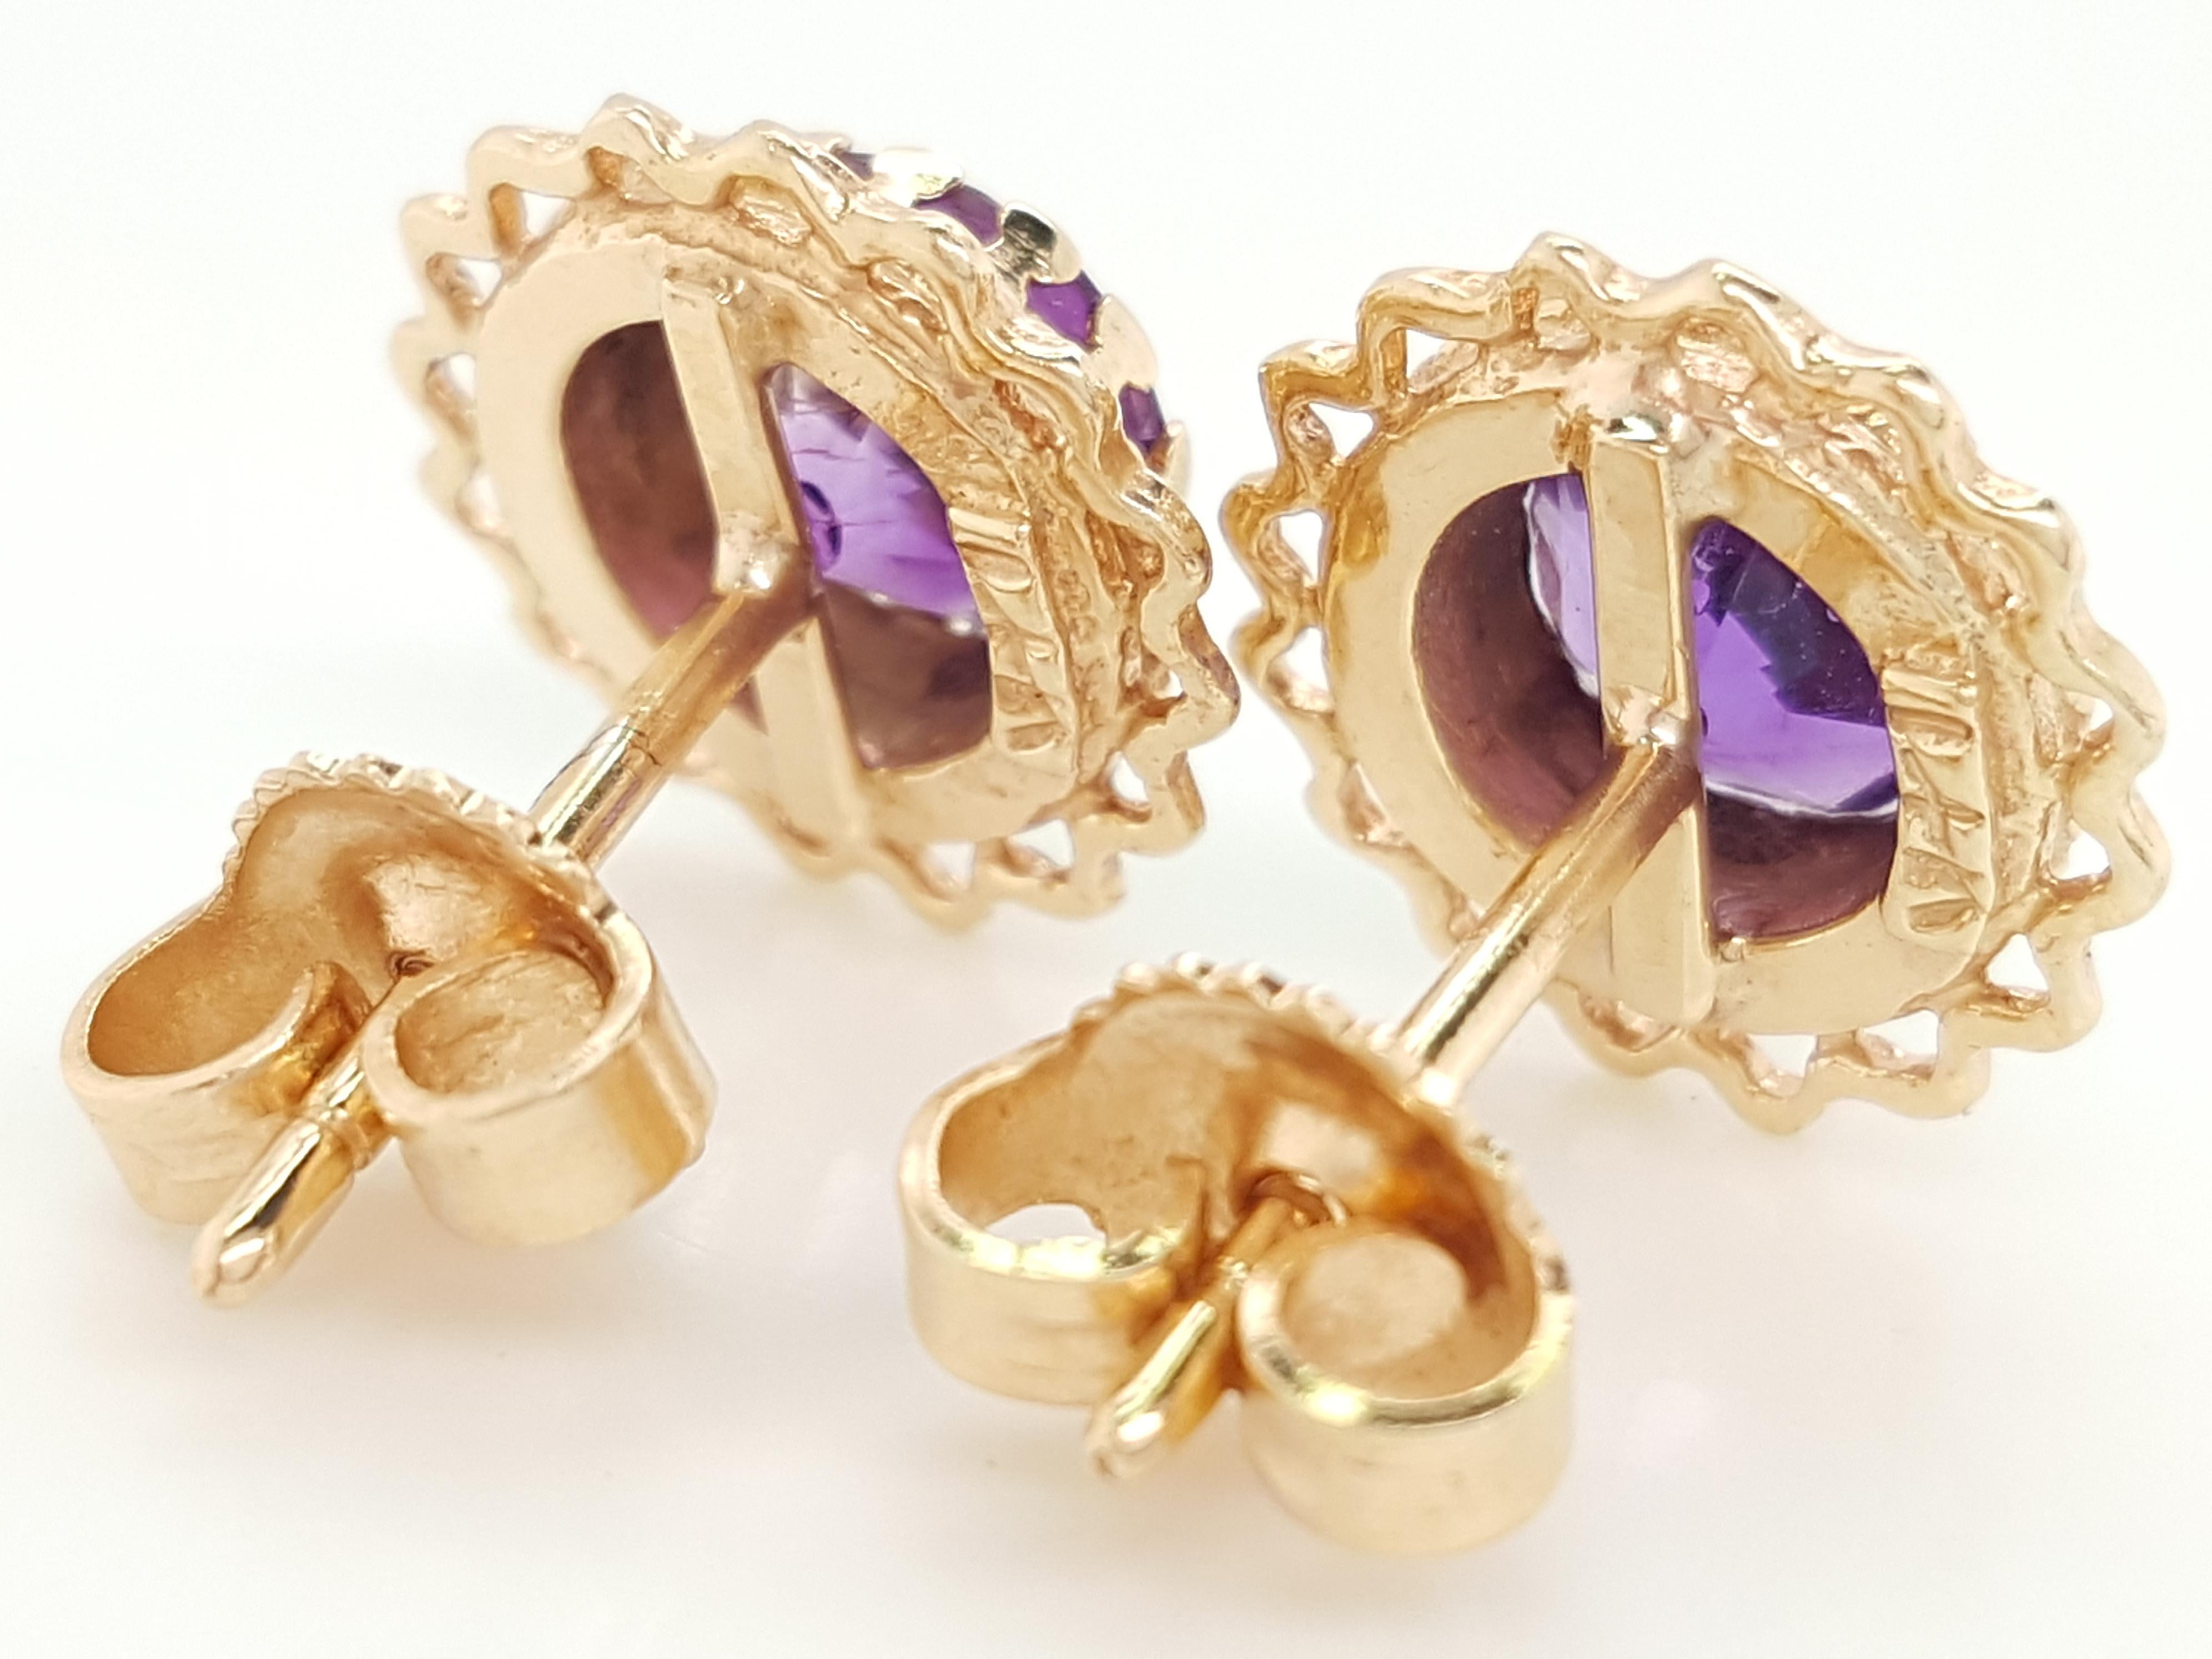  14 Karat Yellow Gold Round Amethyst  Bezel Set Stud Earrings   The earrings feature a matched pair of faceted round amethyst weighing approximately  1.55 carats.  The amethyst are each set into a 14 karat yellow gold bezel framed by a feminine